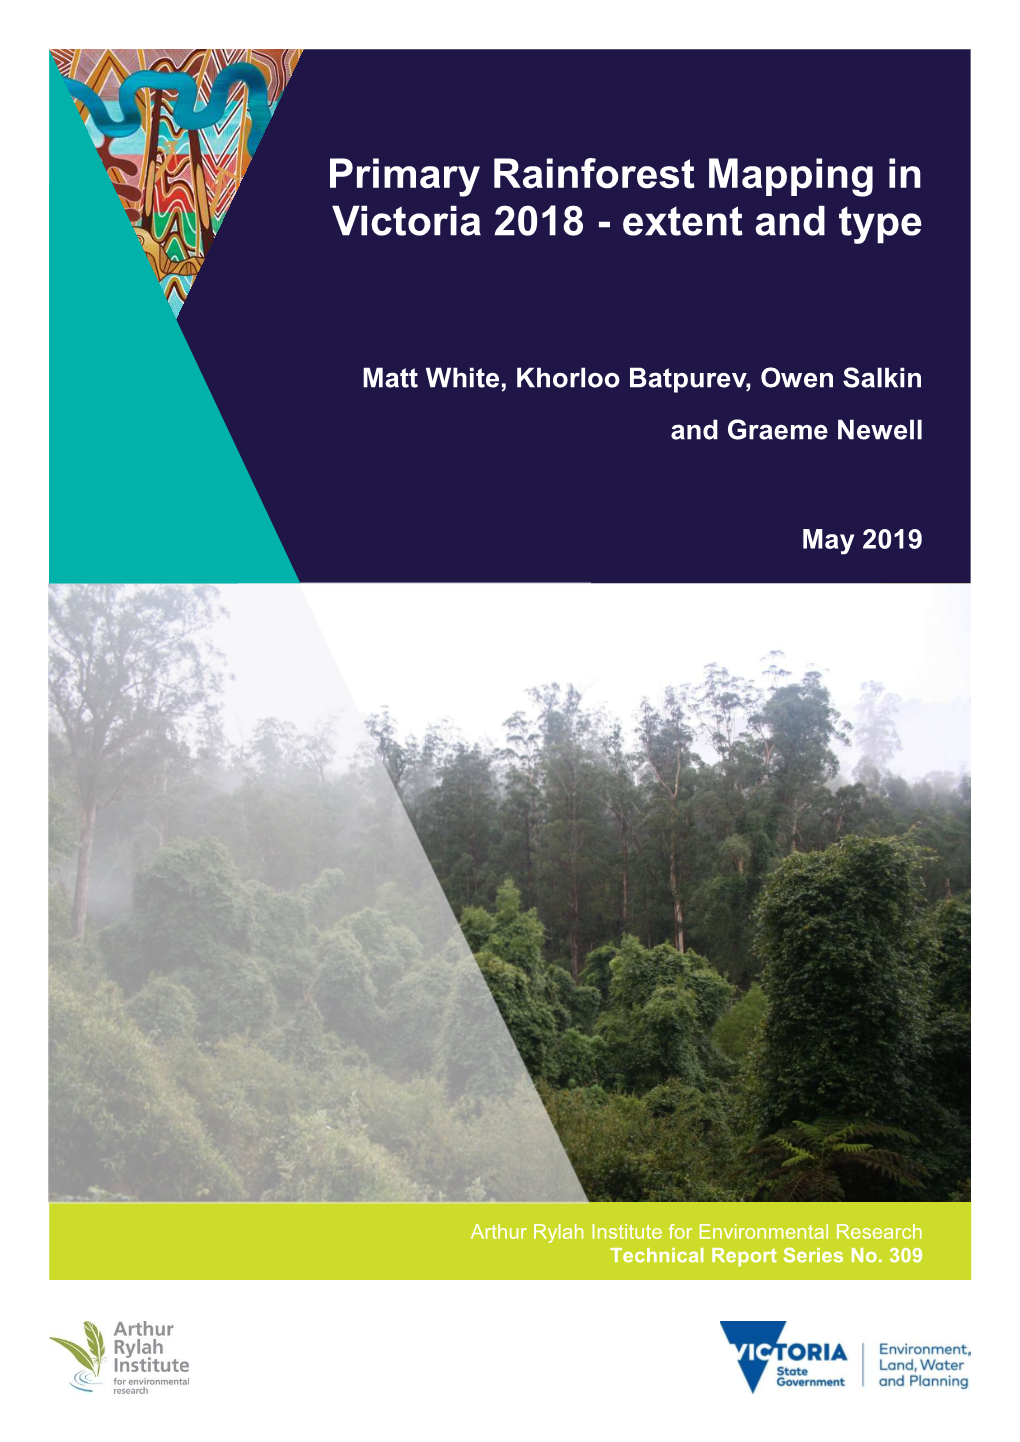 Primary Rainforest Mapping in Victoria 2018 - Extent and Type